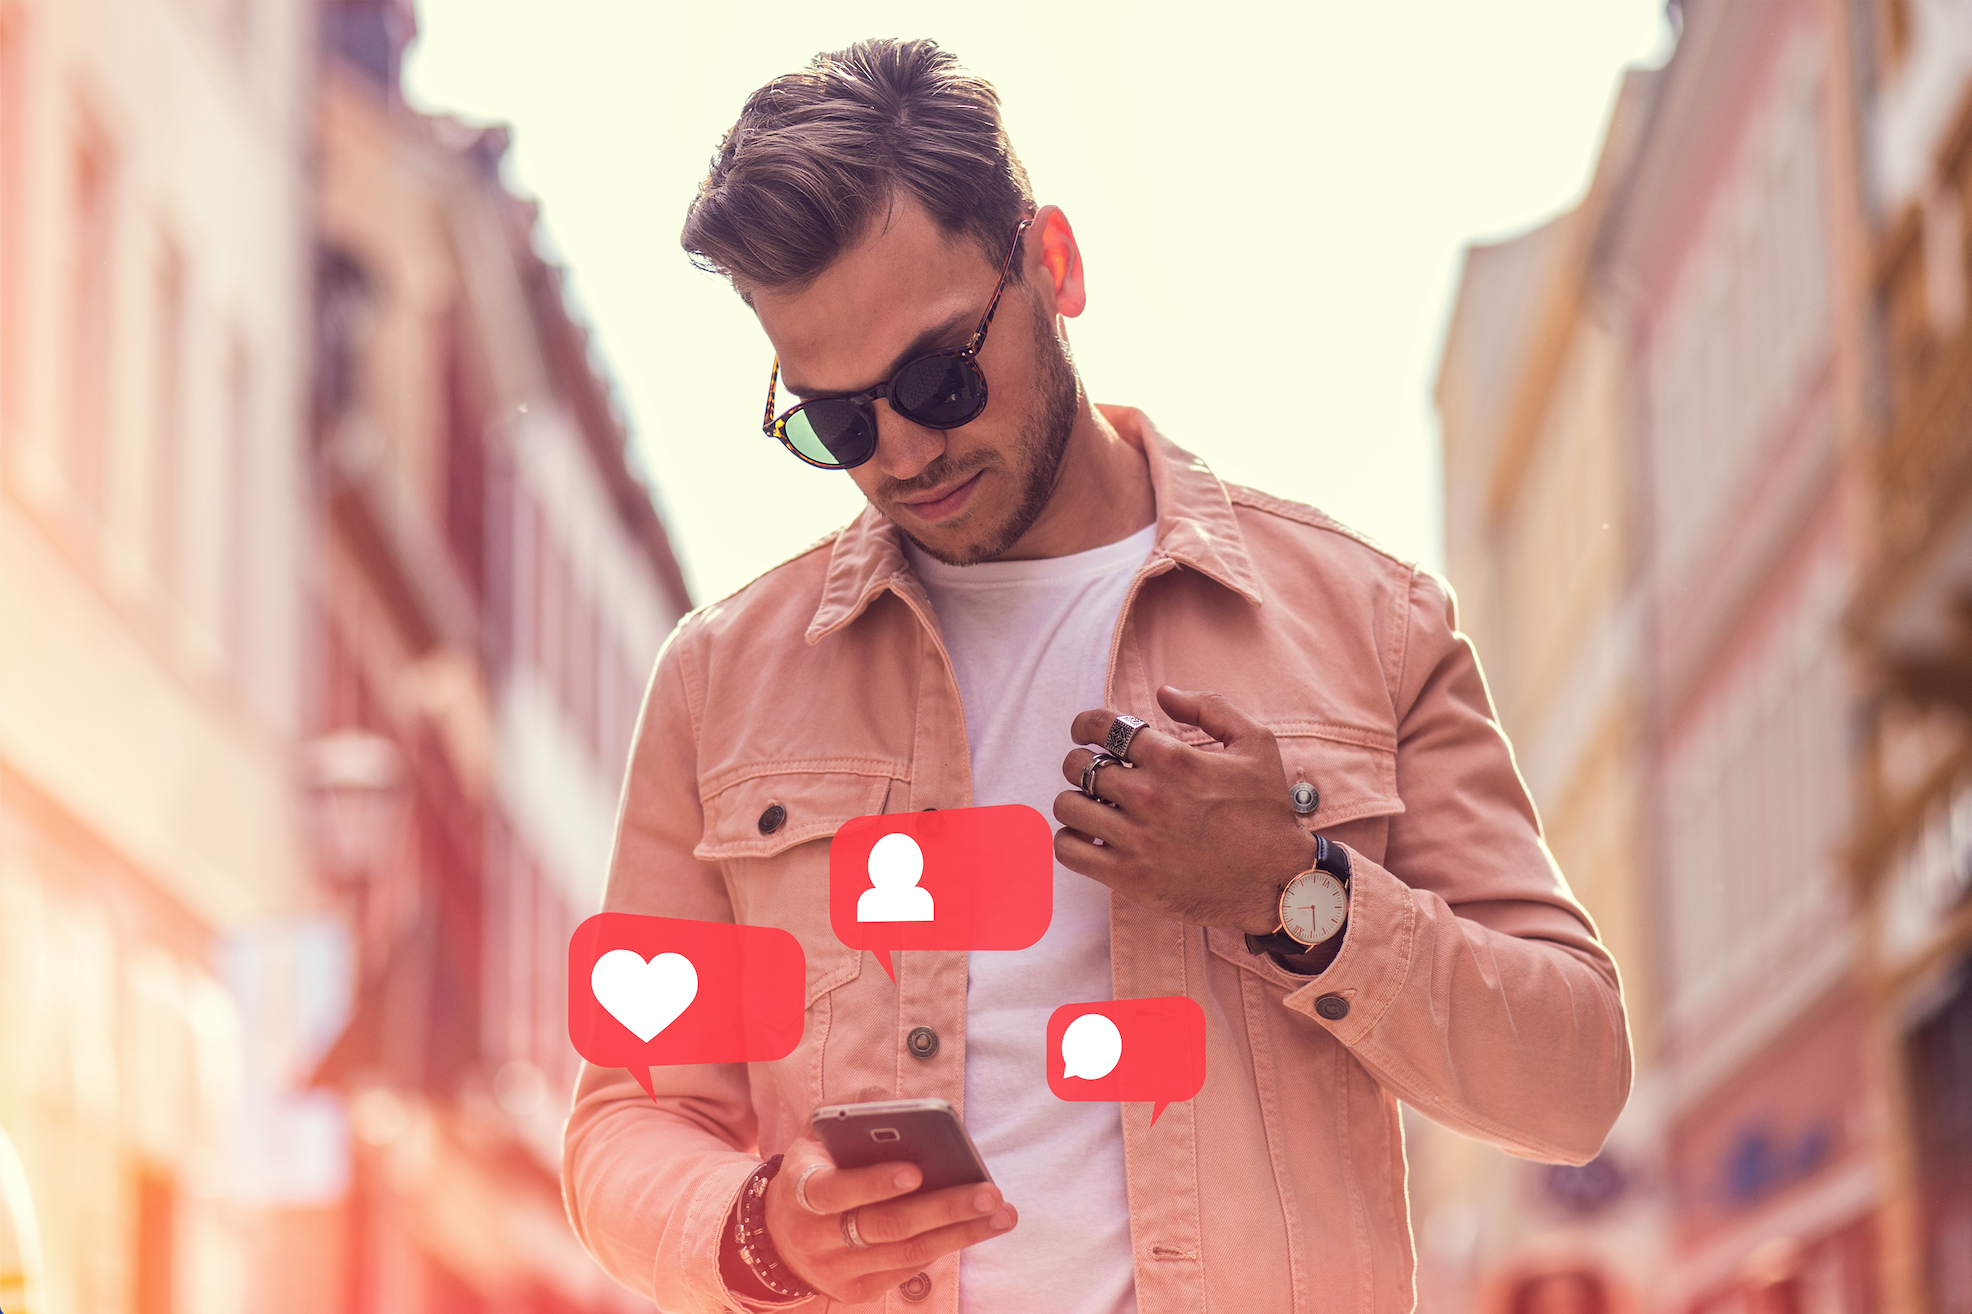 7 Reasons Your Business Should Partner with Social Media Influencers